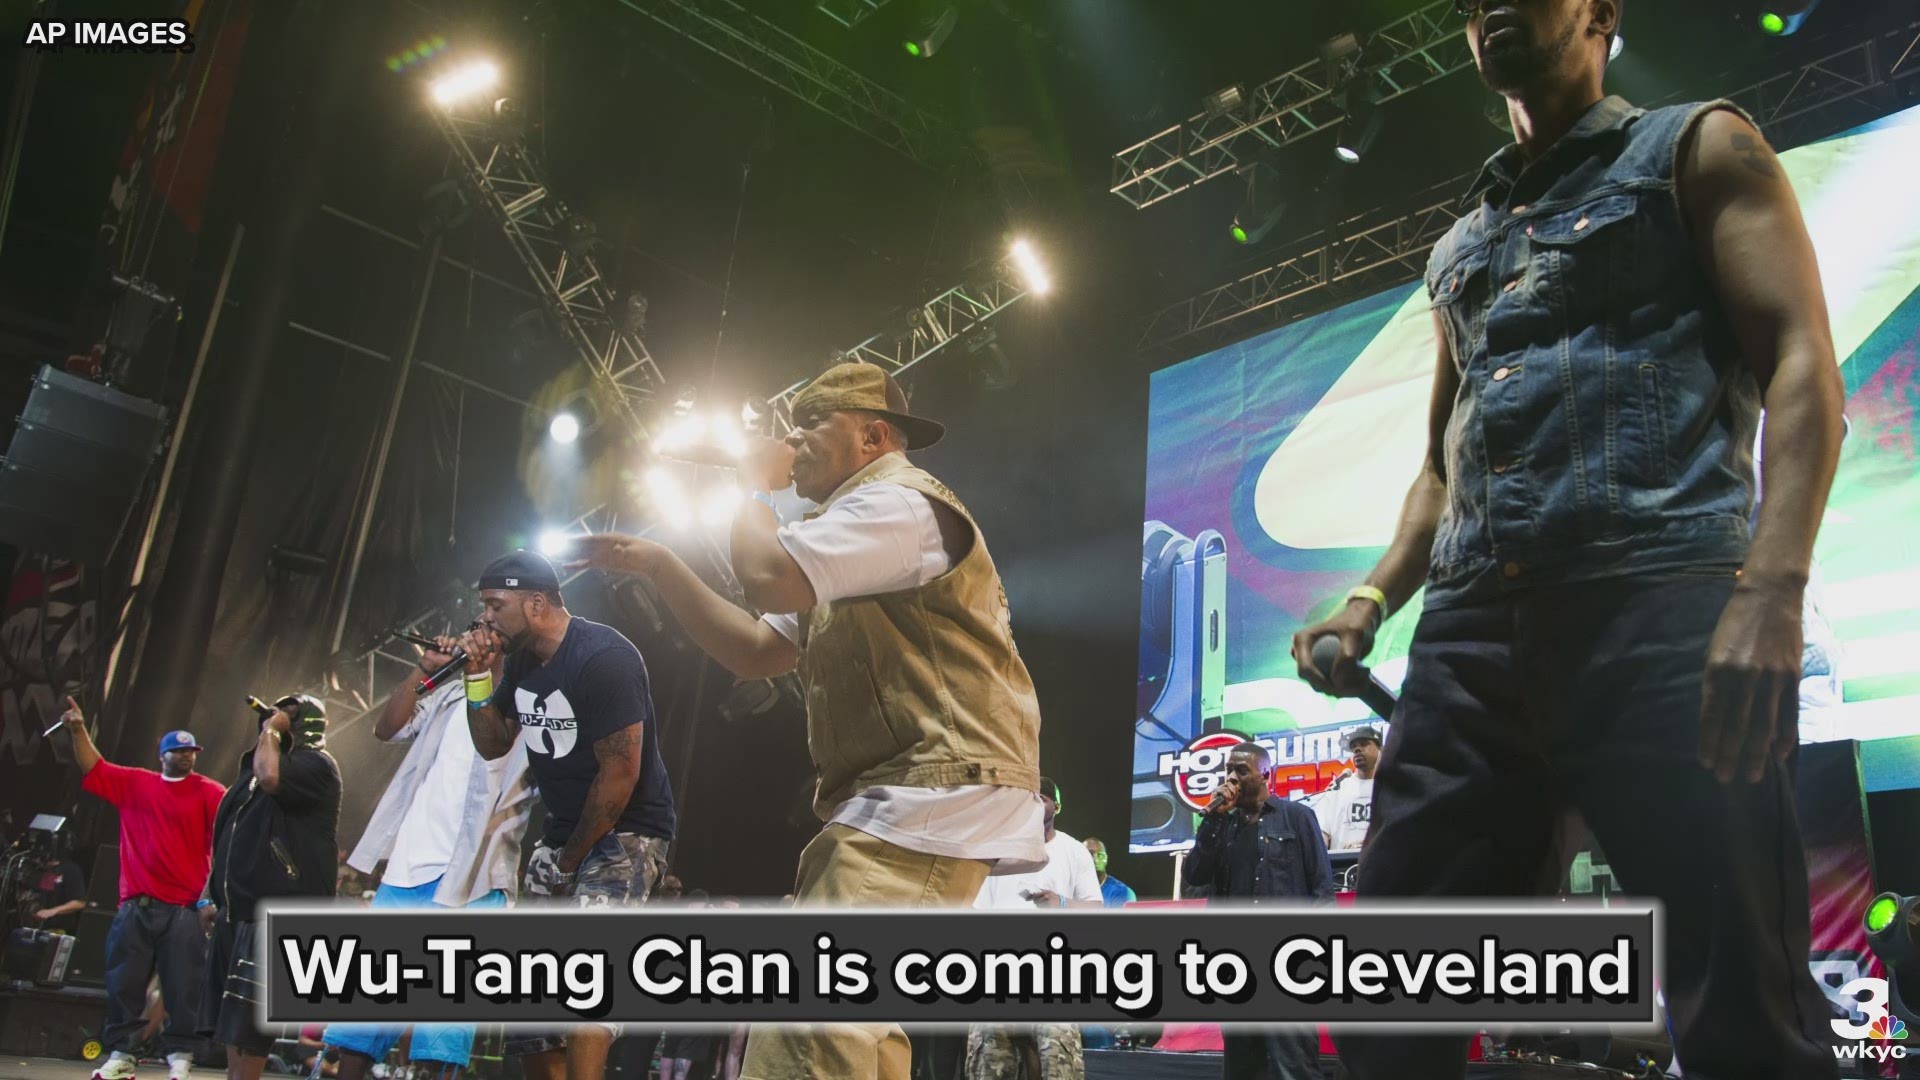 The group will perform at the Agora Ballroom on June 2 as part of the 25th anniversary of their debut studio album Enter the Wu-Tang (36 Chambers).